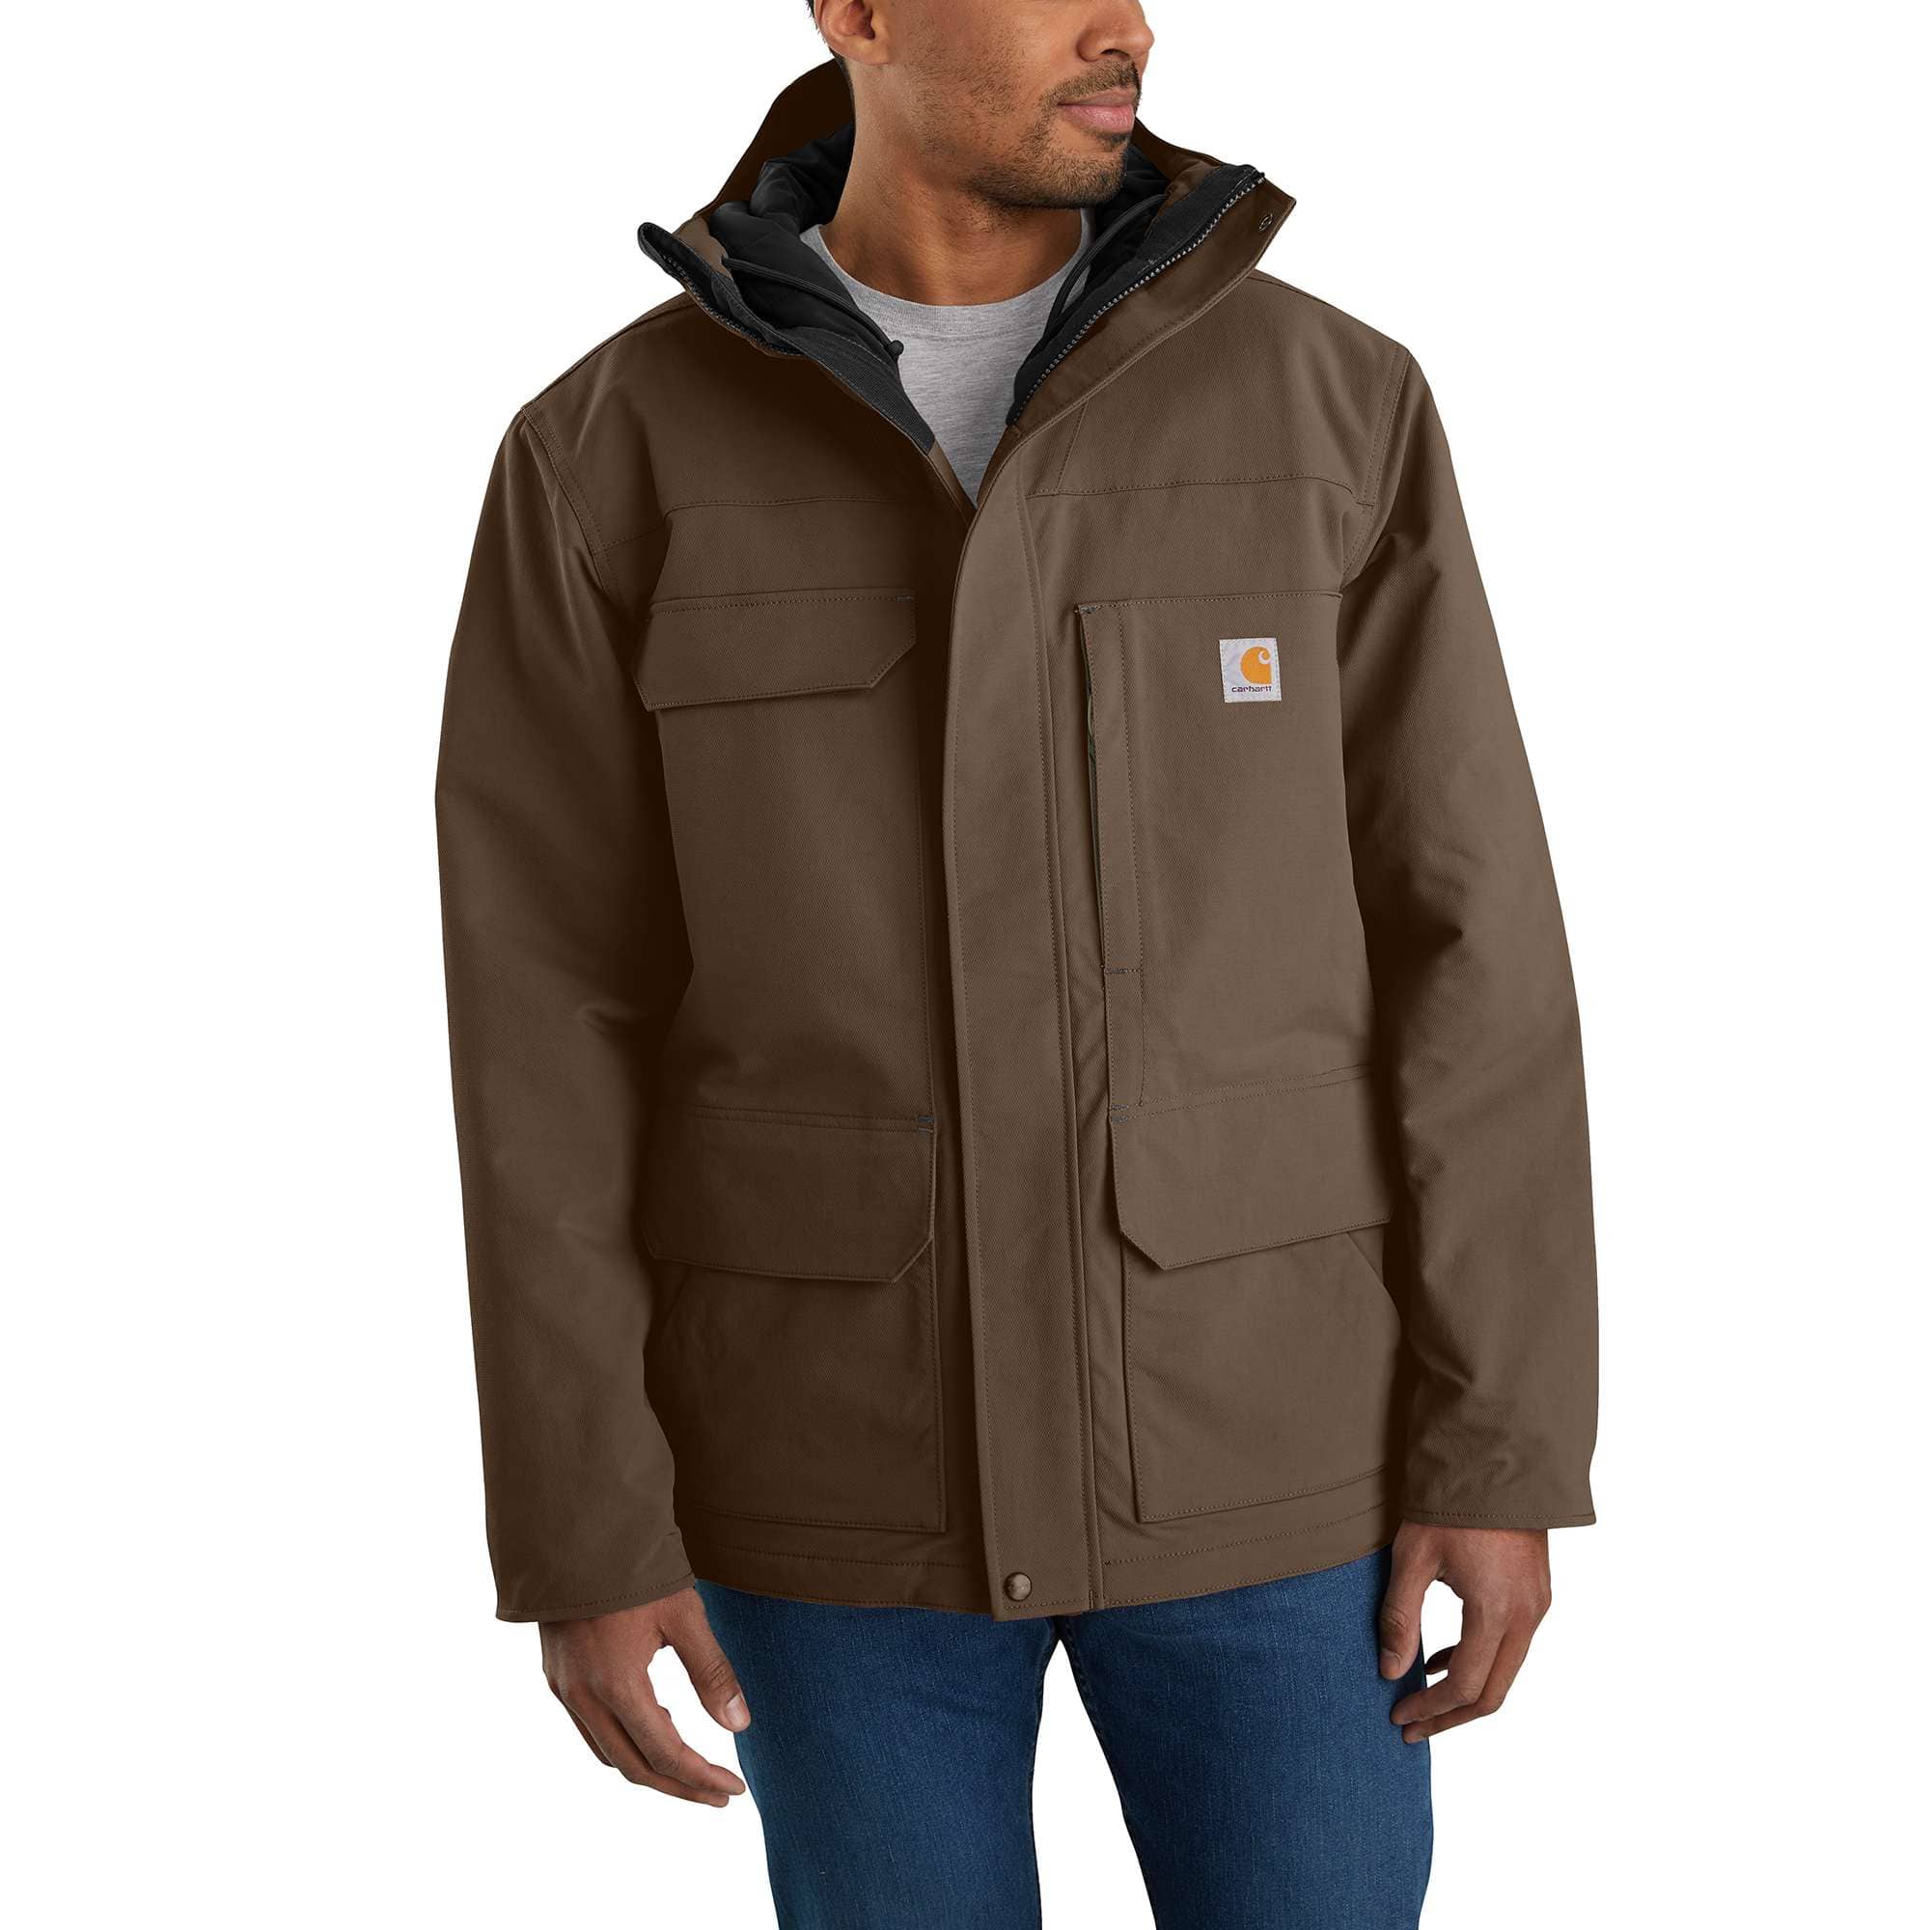 100% cotton Duck jacket with a hoo - 103826 - CARHARTT